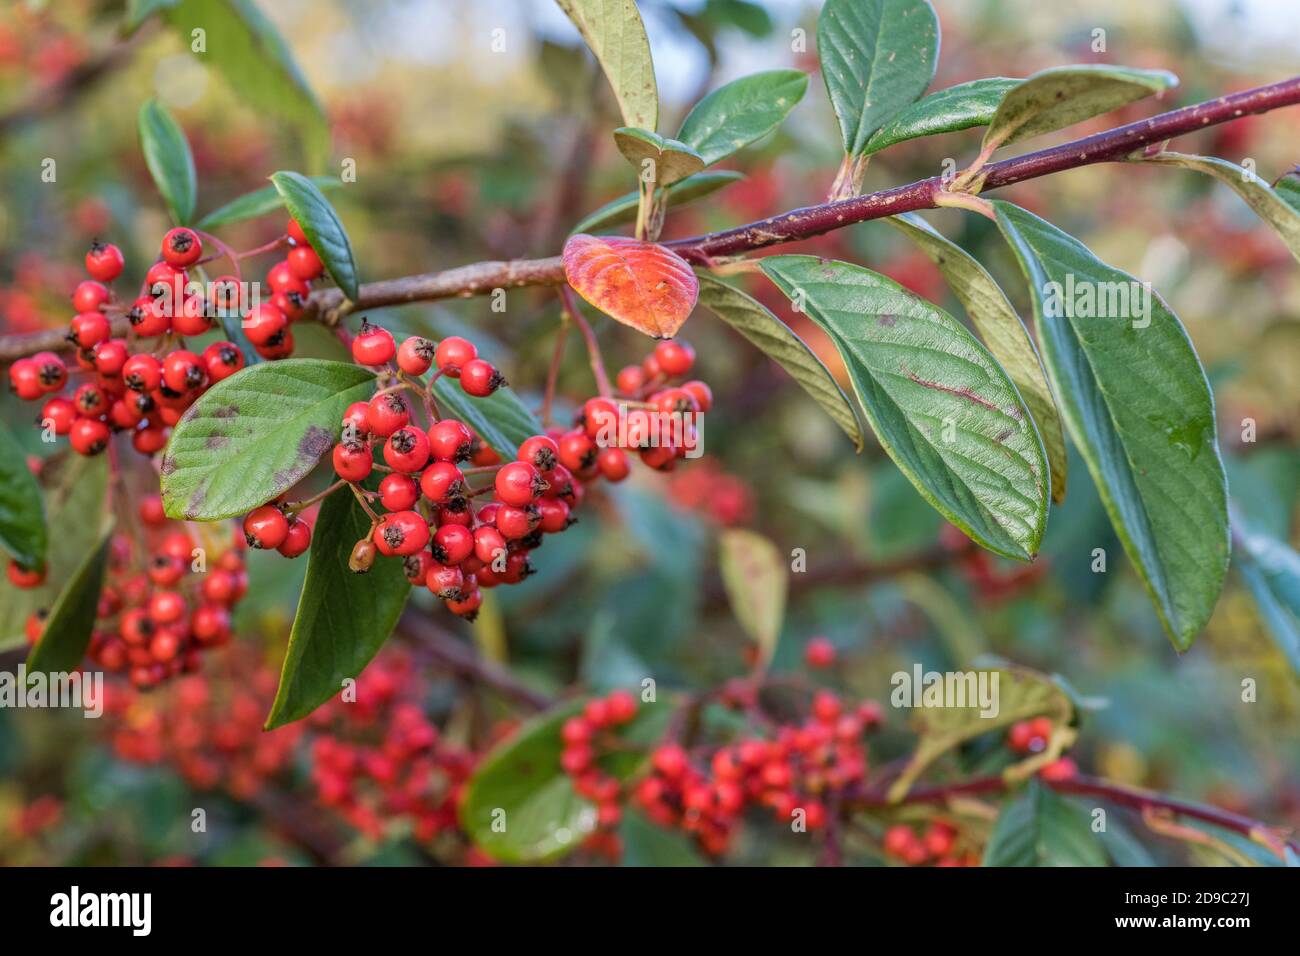 Red berries of Cotoneaster. Part of annual growth cycle sequence. Either Cotoneaster lacteus or Cotoneaster frigidus = C. Cornubia. Stock Photo